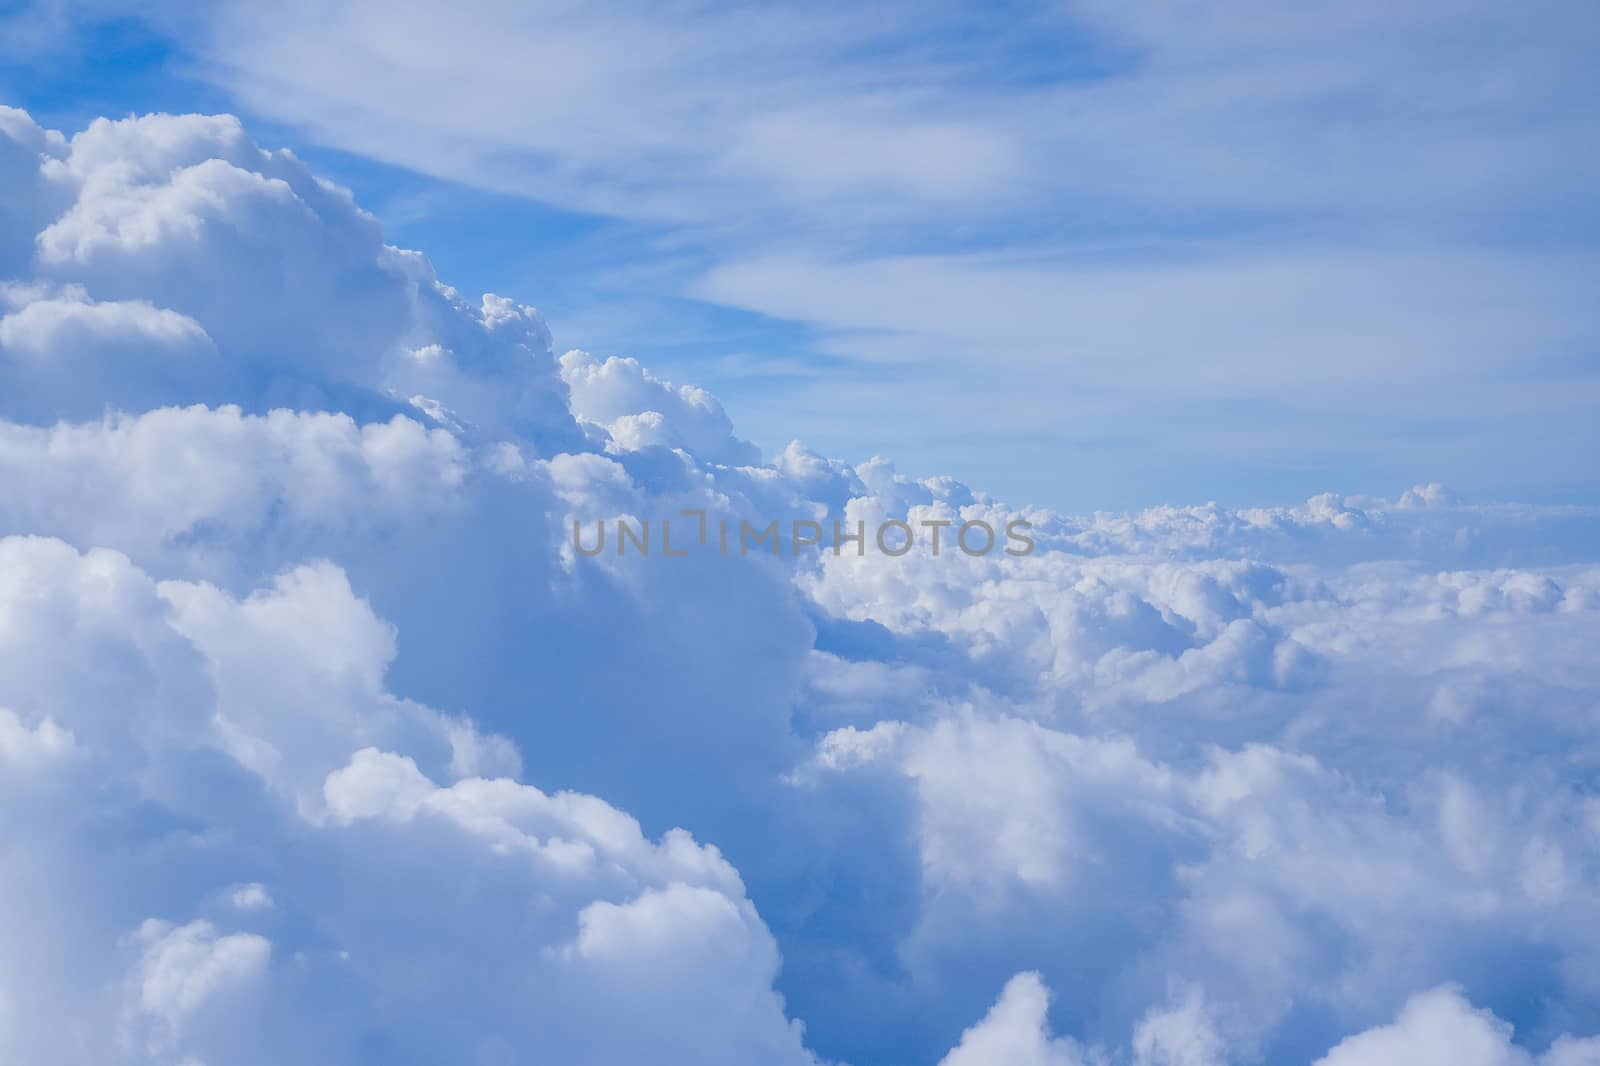 
Clouds view from the airplane by Surasak